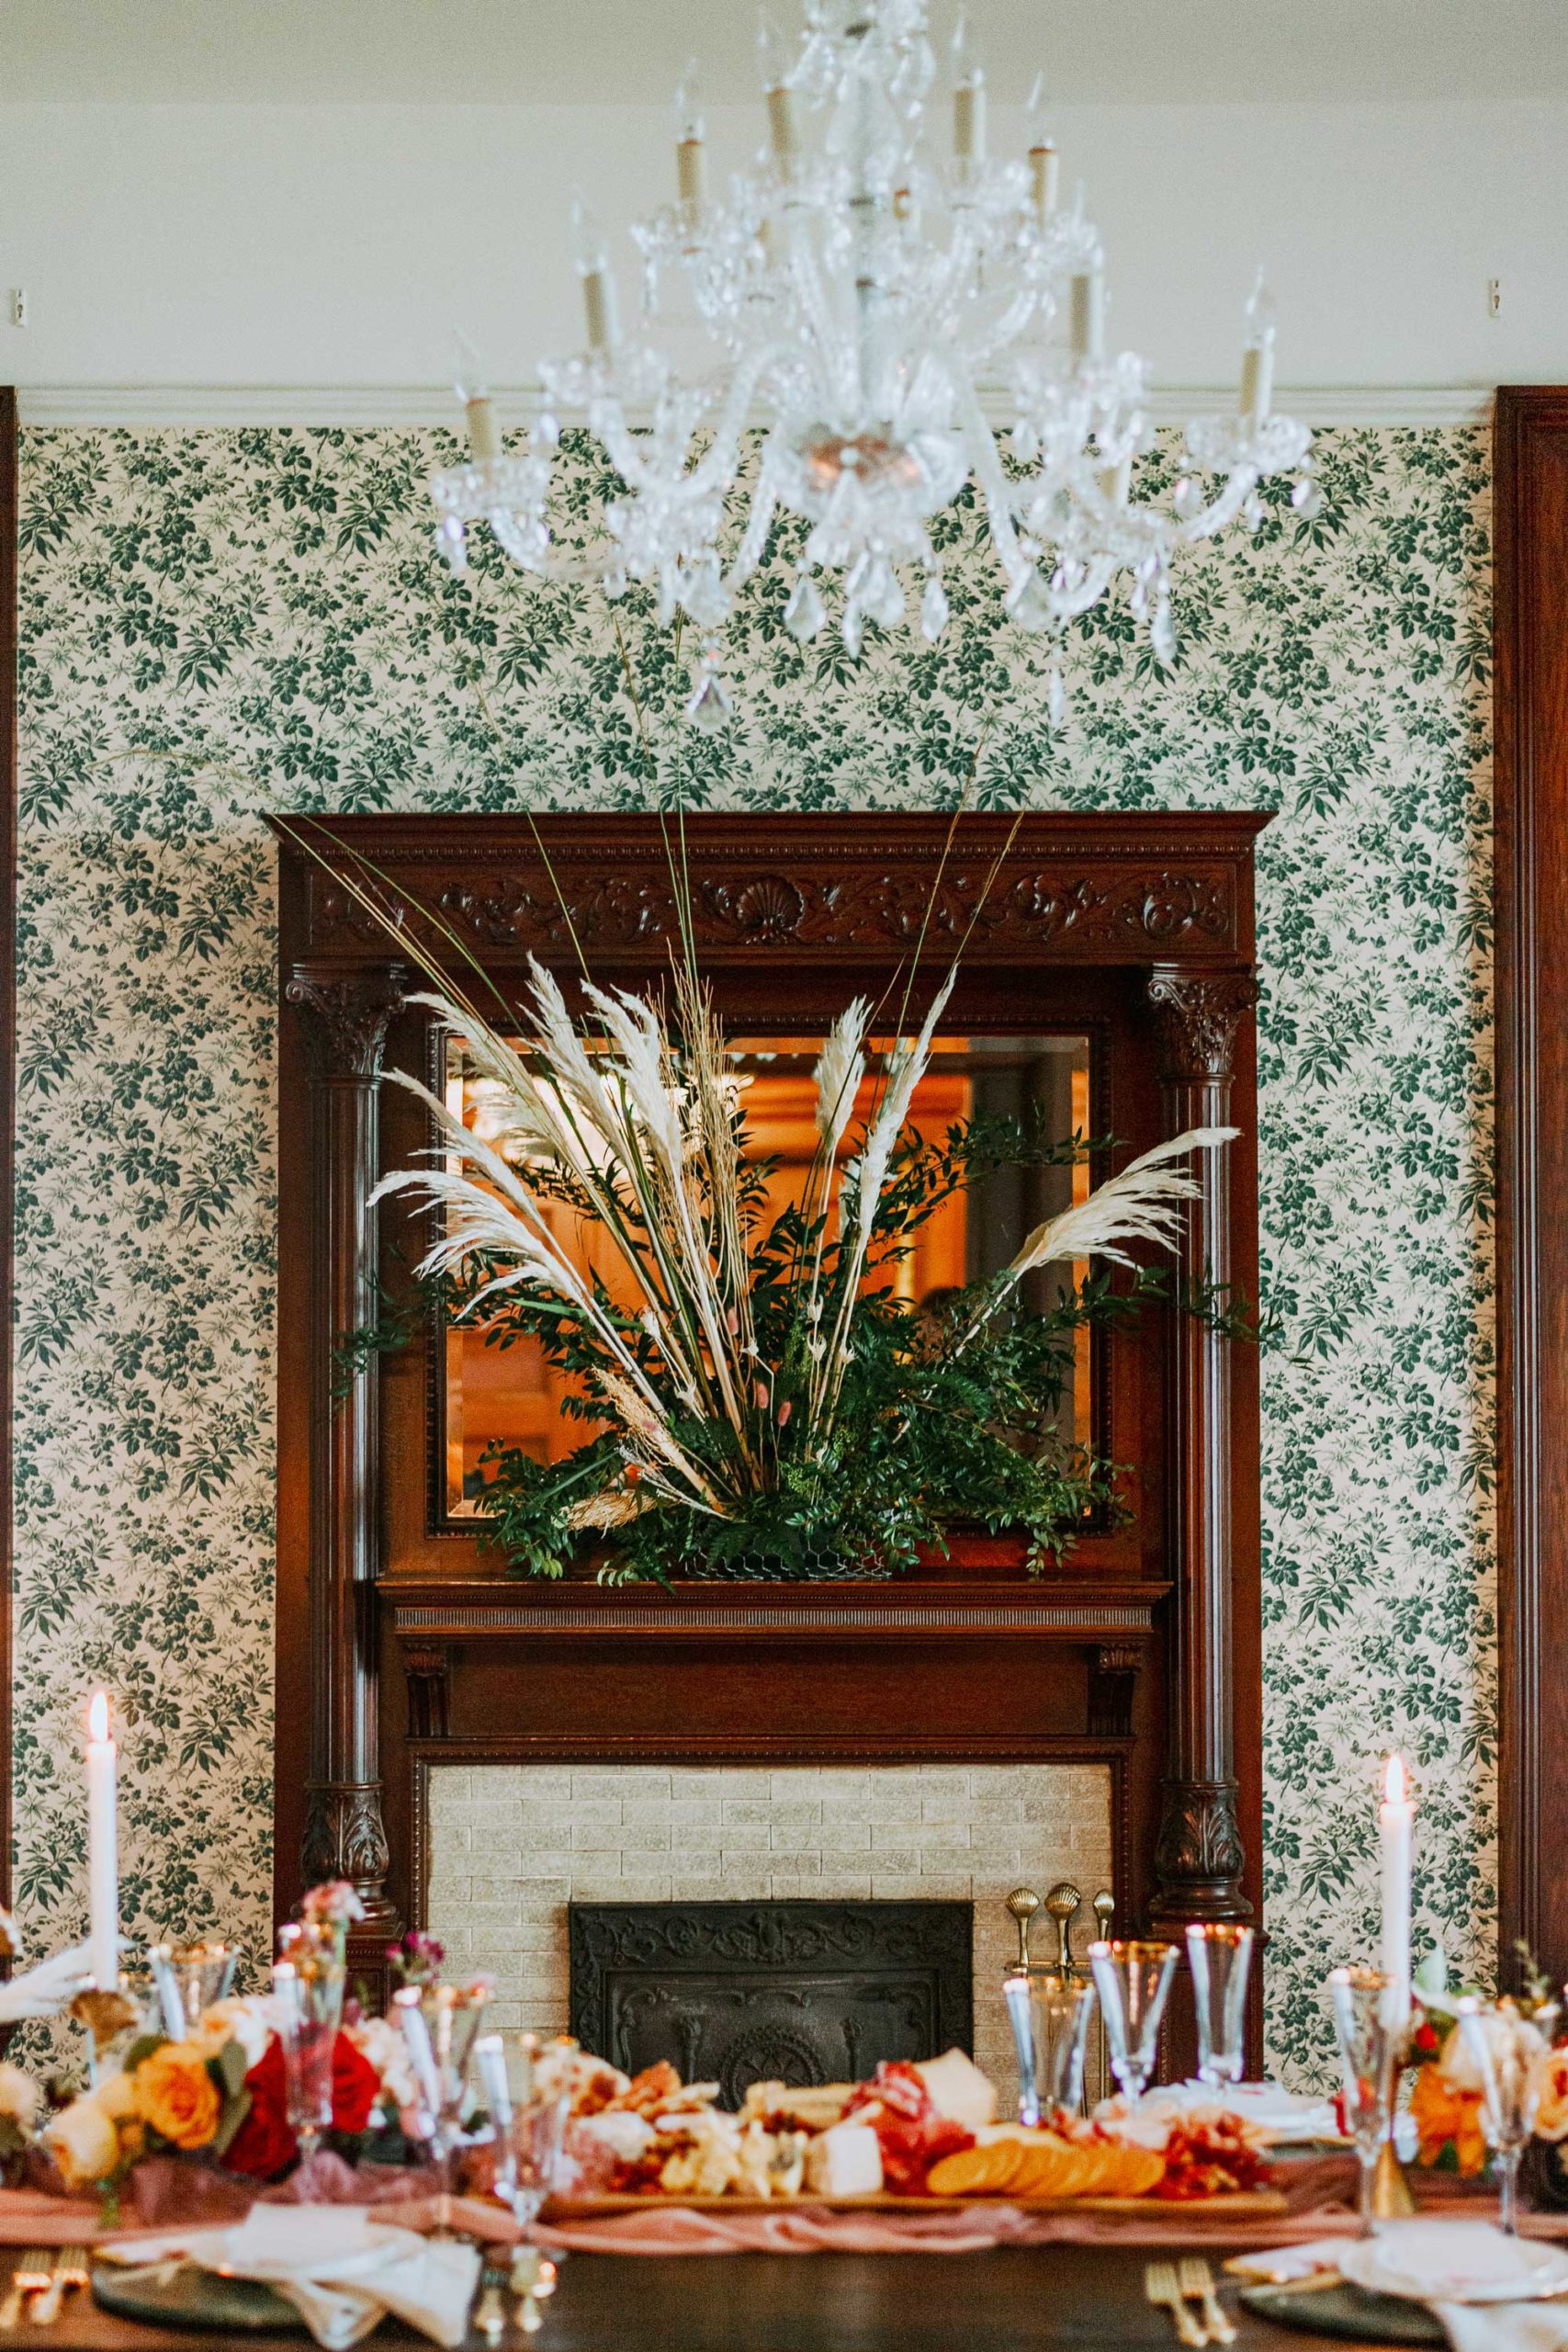 Decorated table and fireplace with crystal chandelier